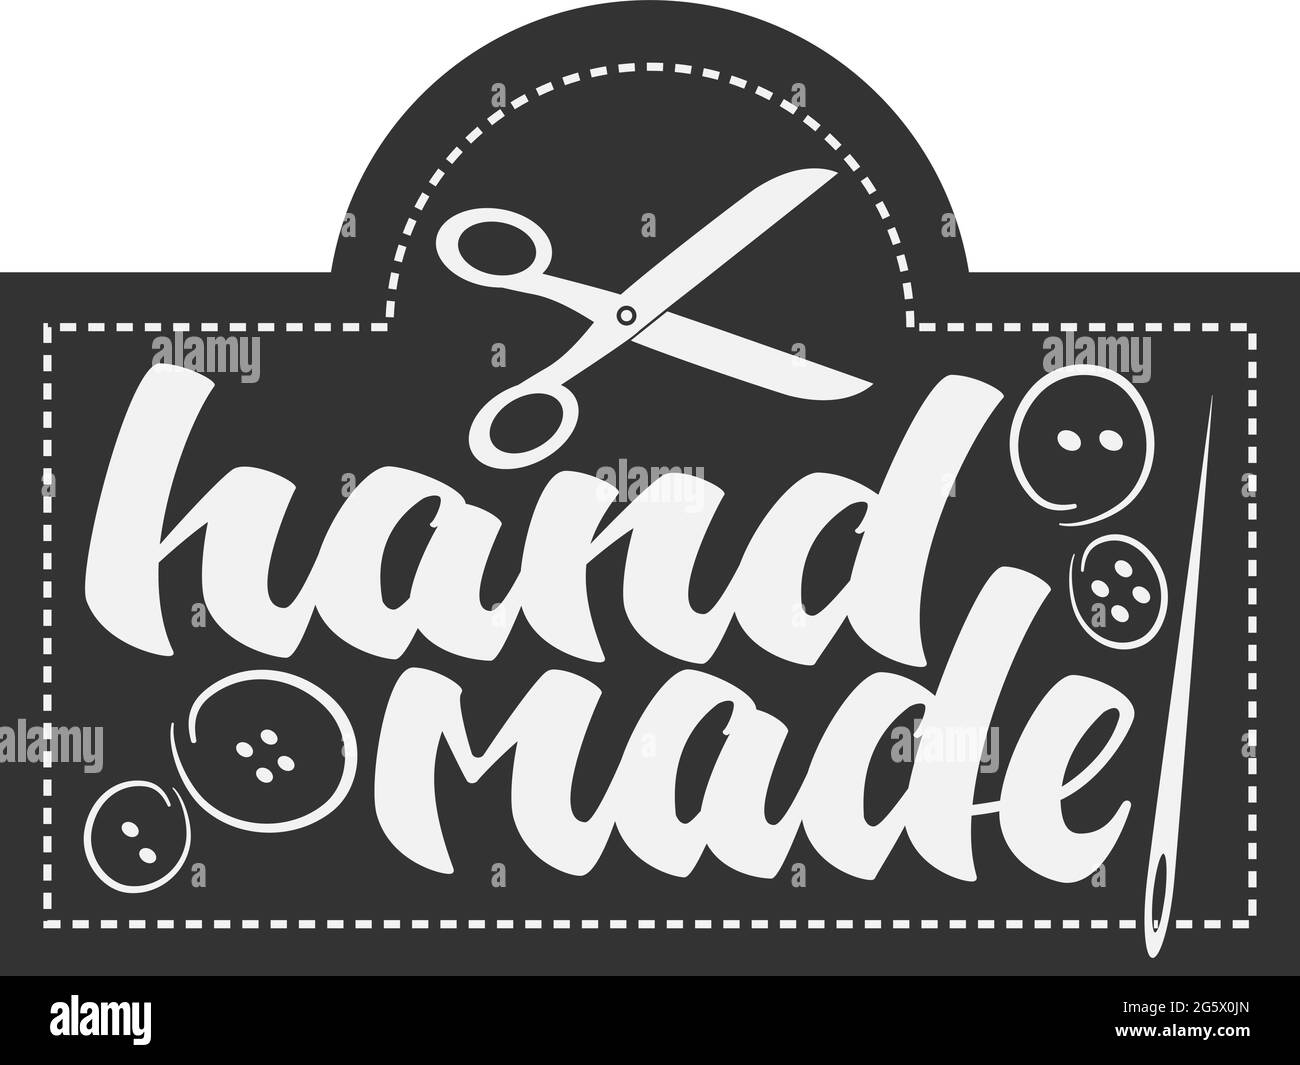 HANDMADE logo or label with scissors and needle and thread, vector illustration Stock Vector